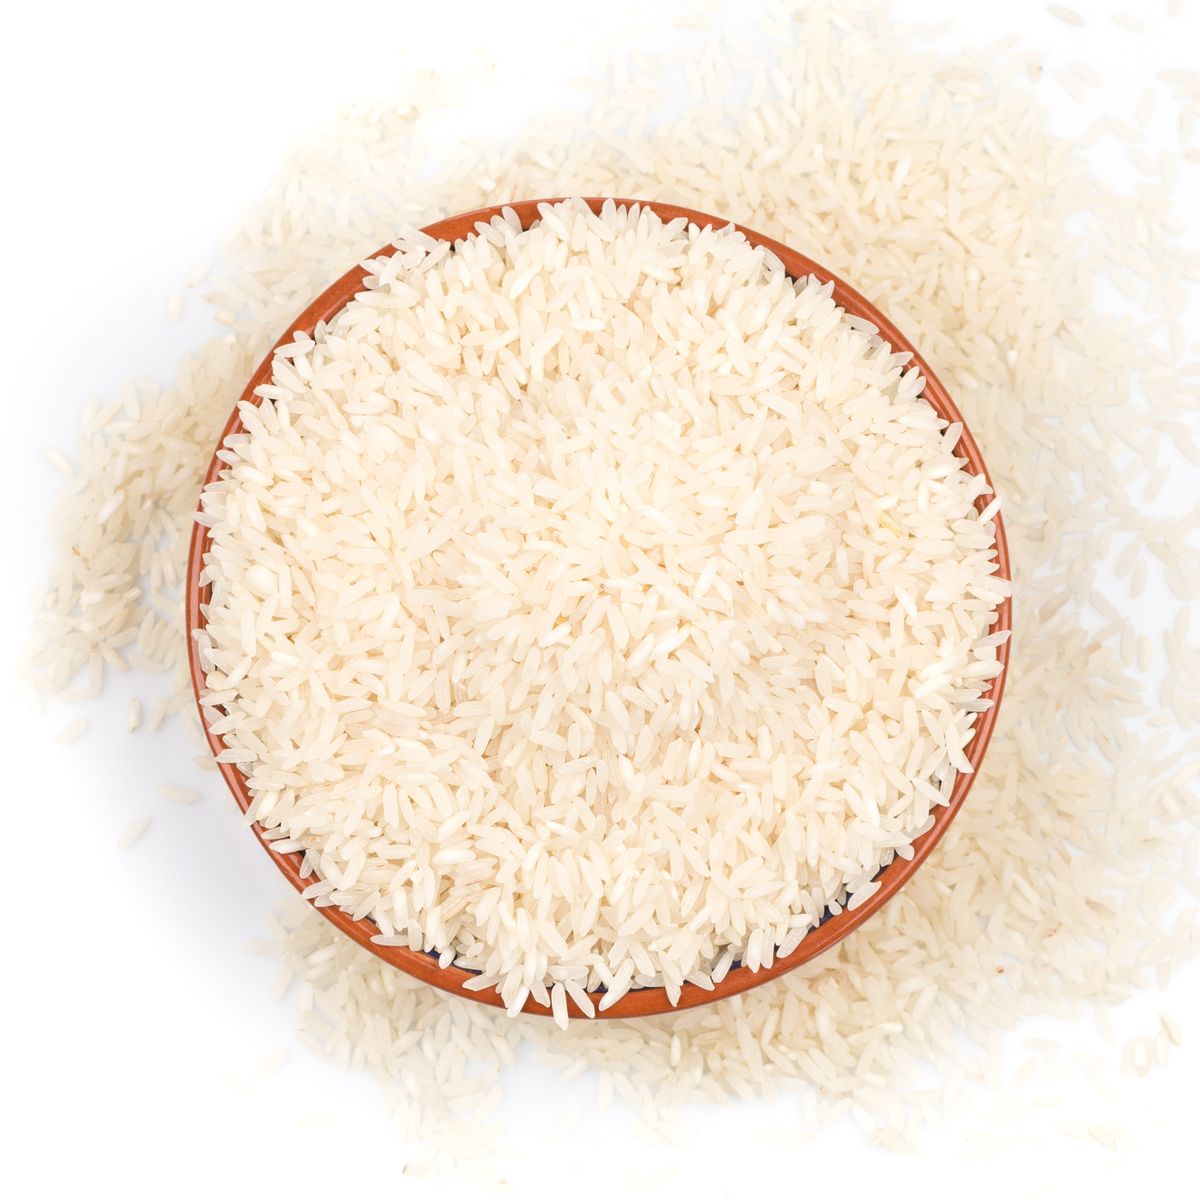 bowl of rice isolated on a white background